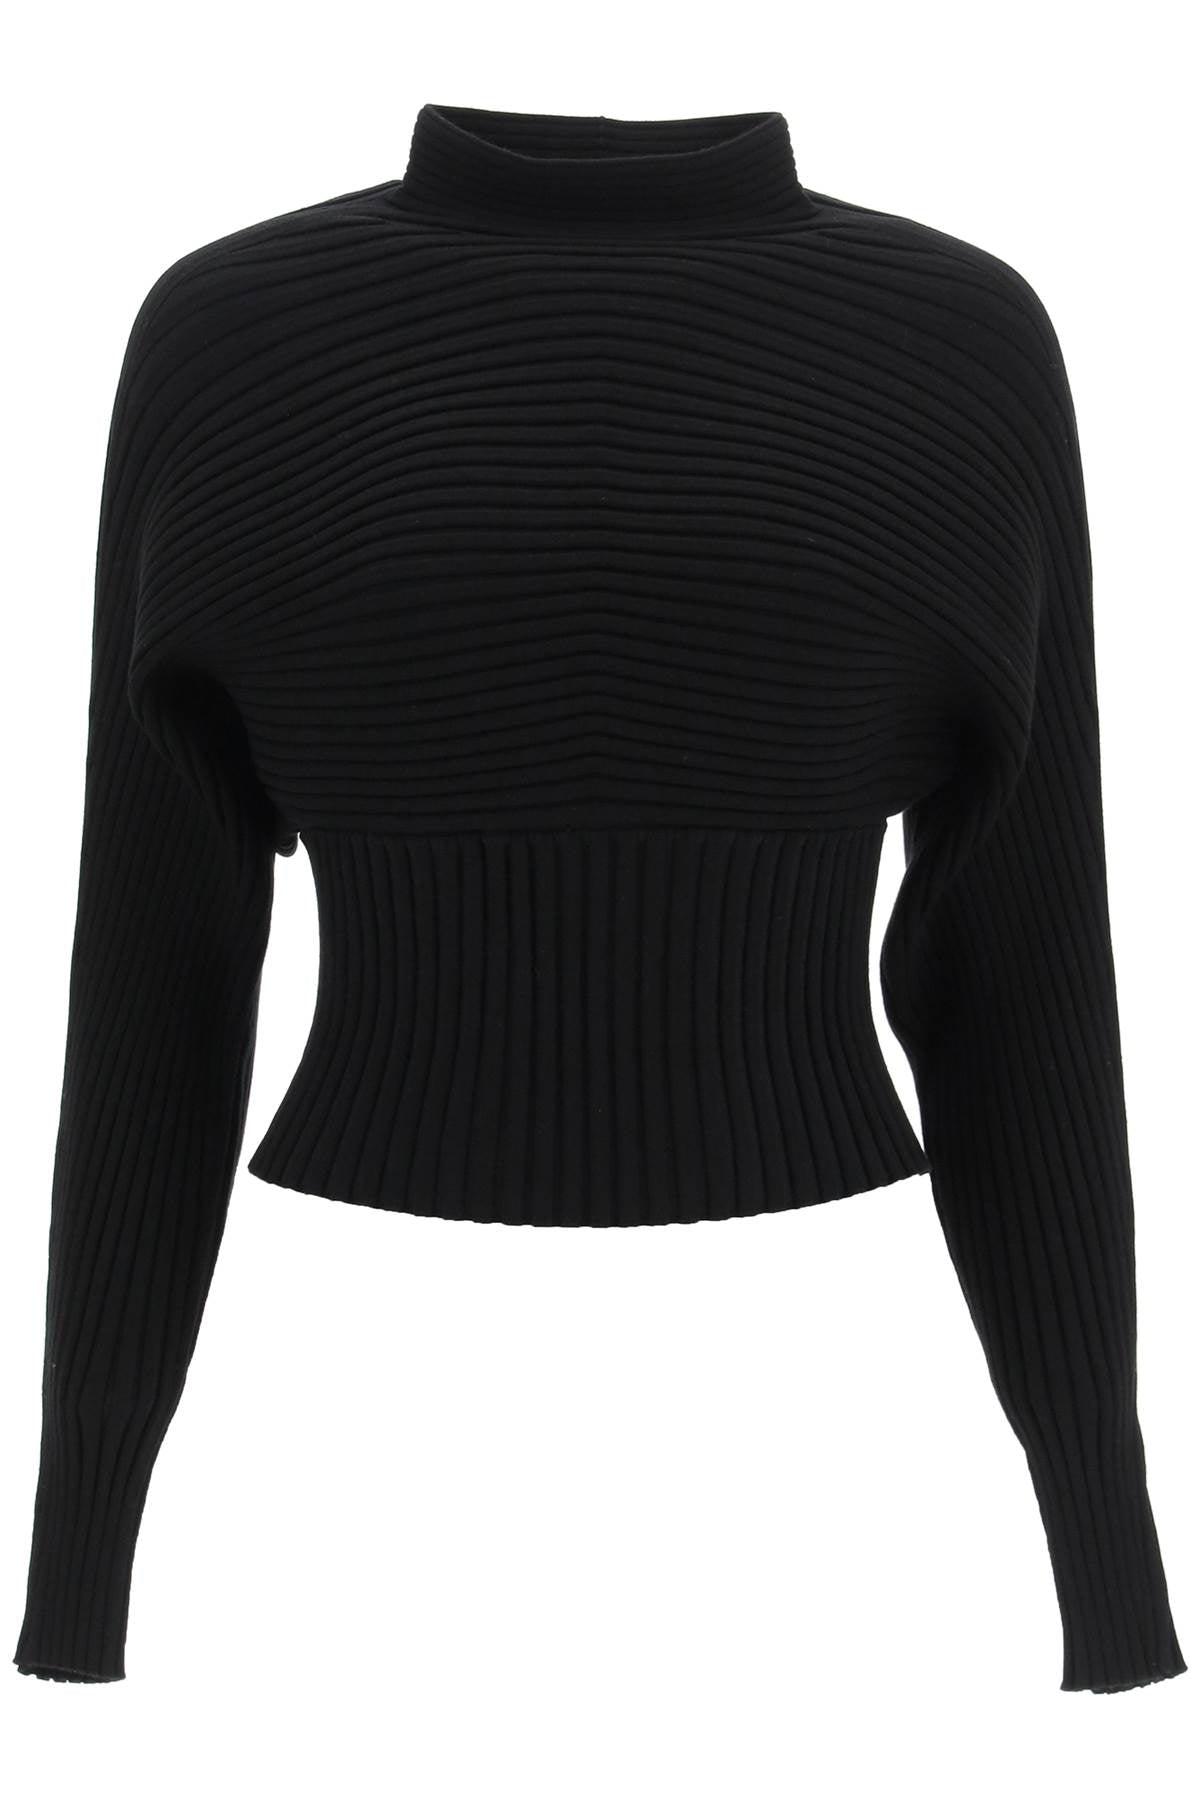 Tory Burch Ribbed Stretch Sweater With Dolman Sleeves in Black | Lyst